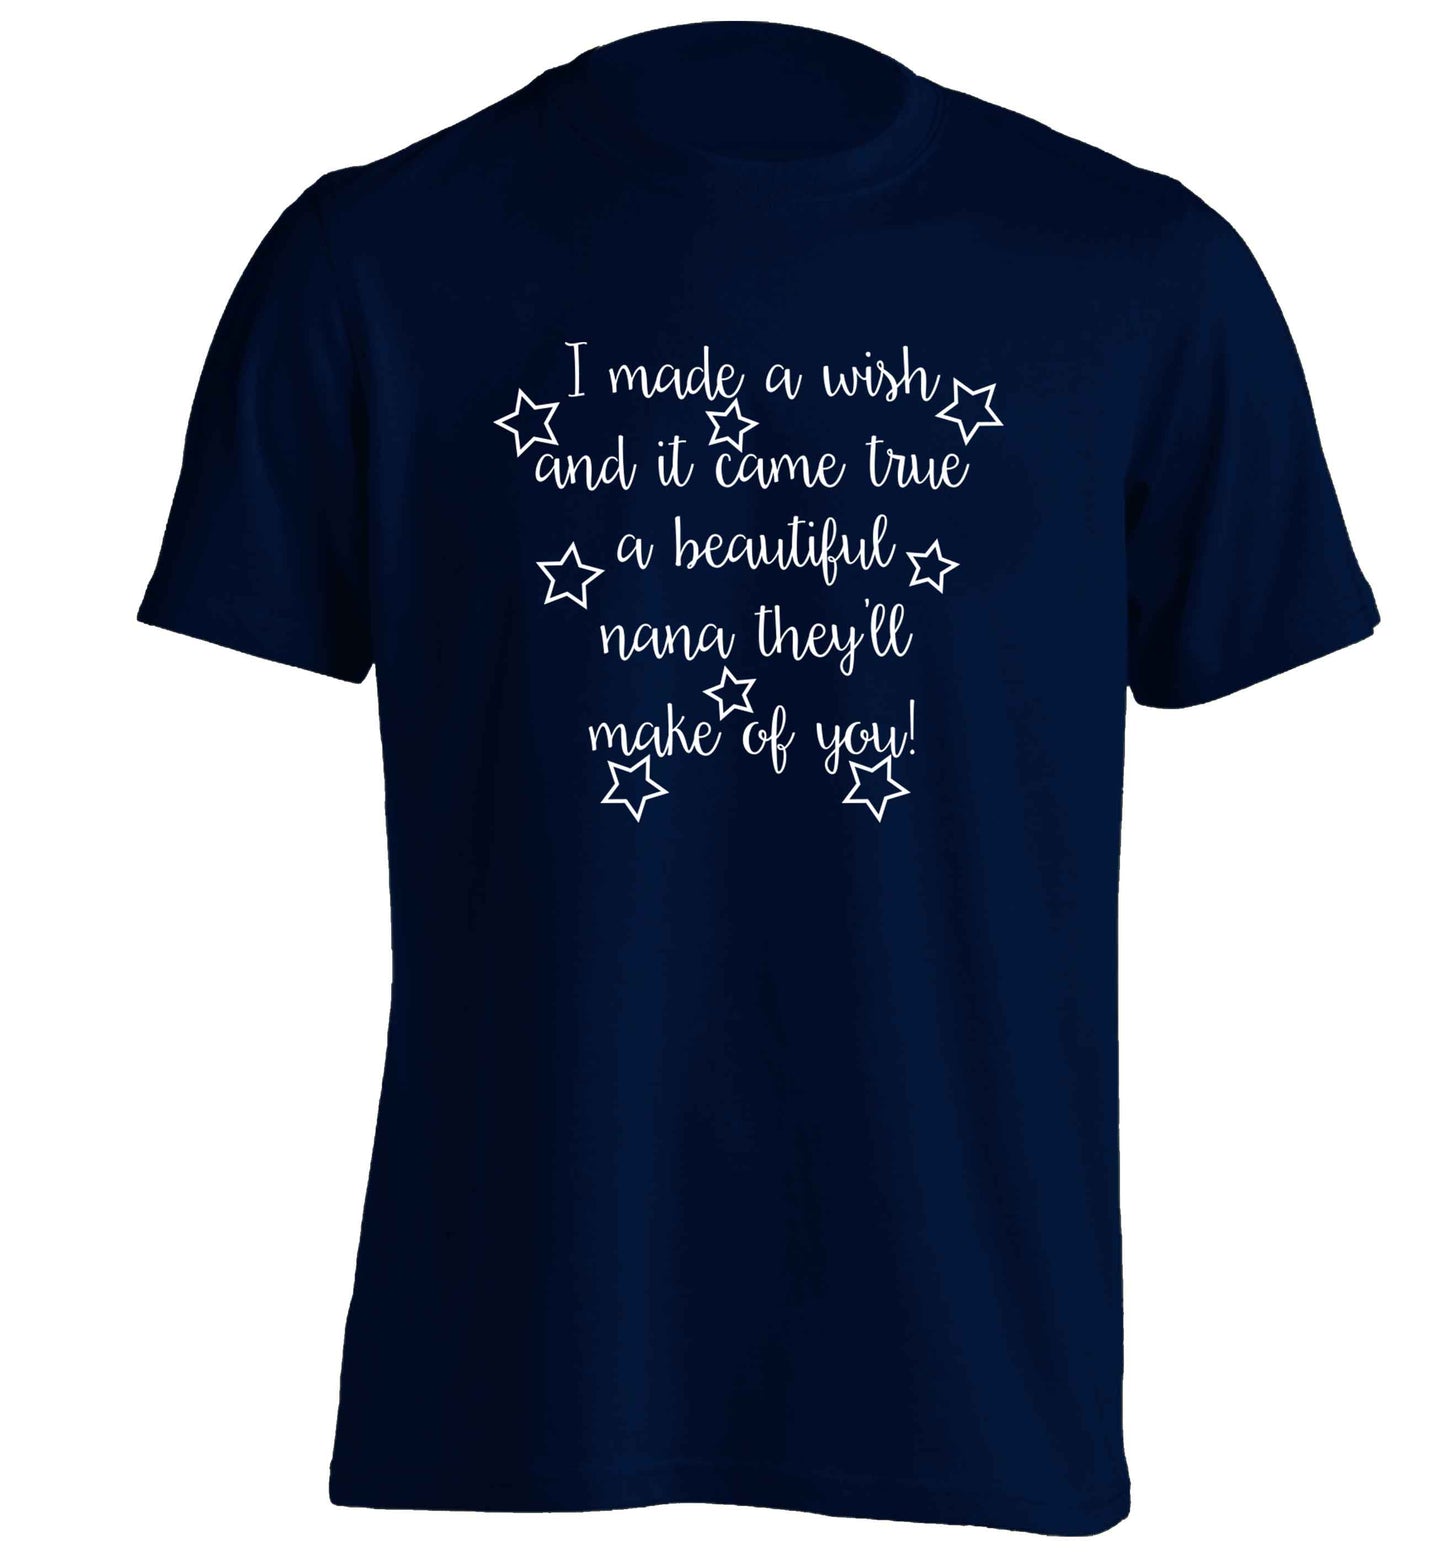 I made a wish and it came true a beautiful nana they'll make of you! adults unisex navy Tshirt 2XL